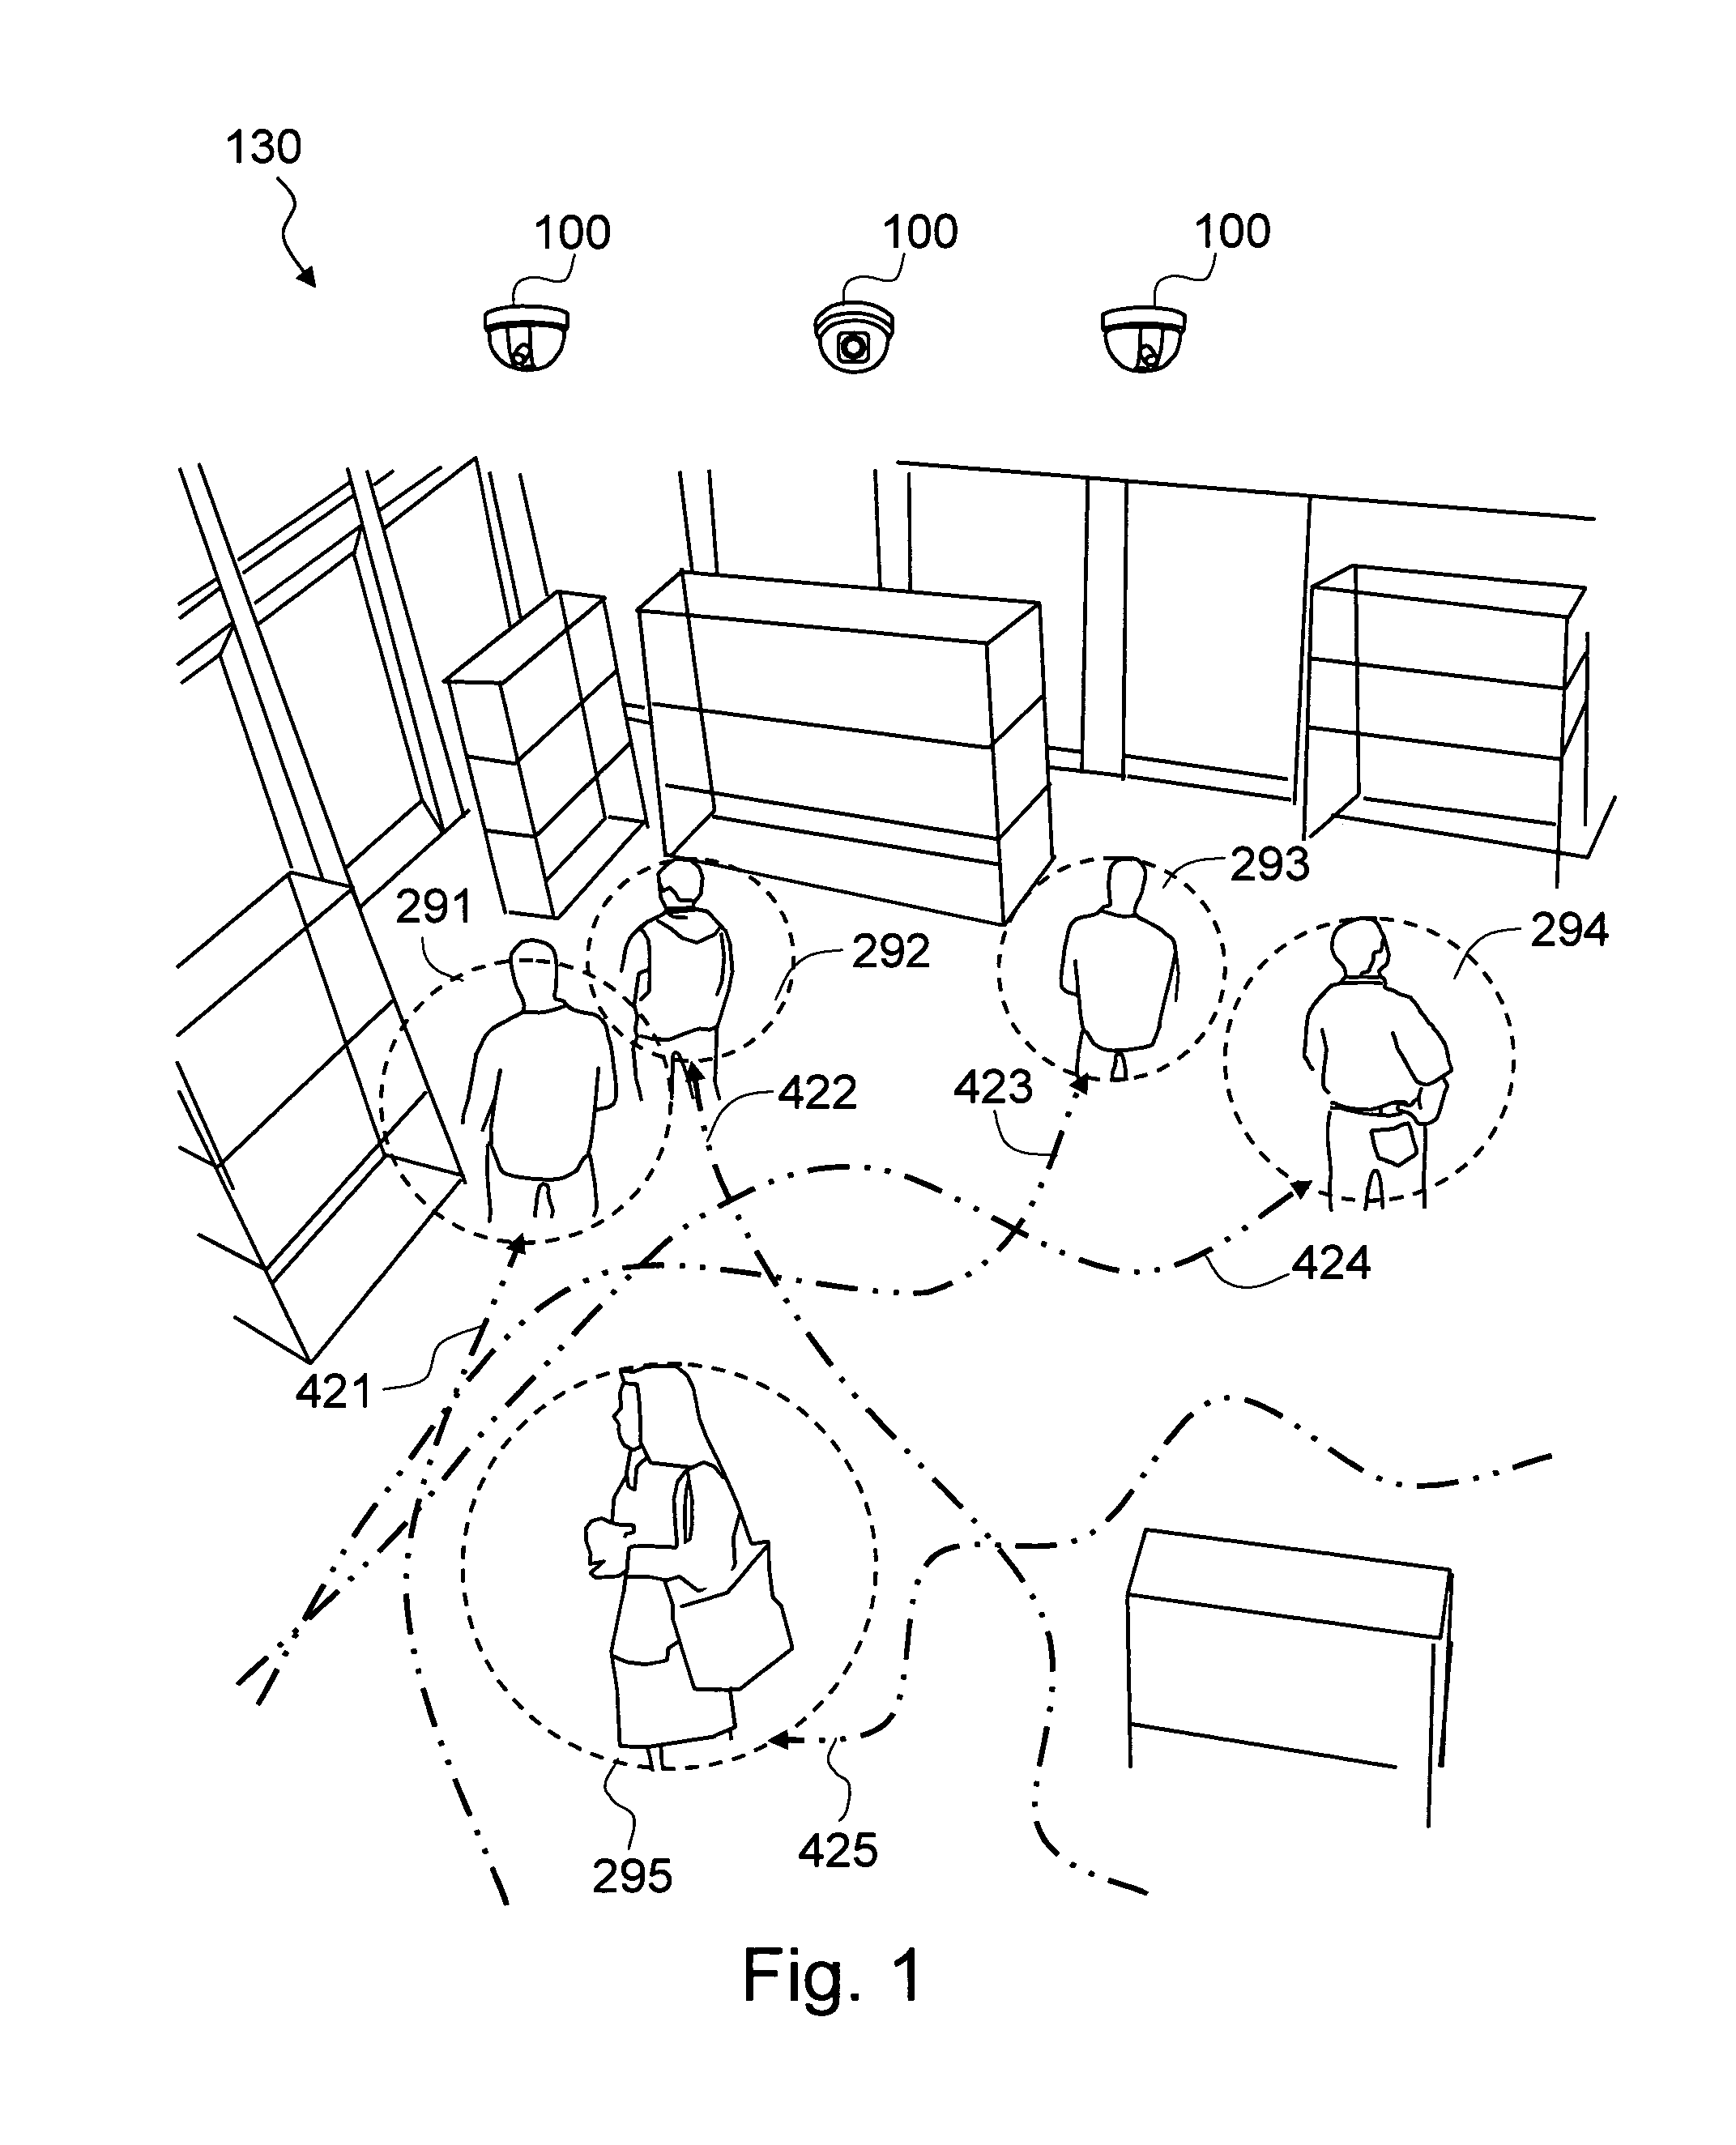 Method and system for segmenting people in a physical space based on automatic behavior analysis